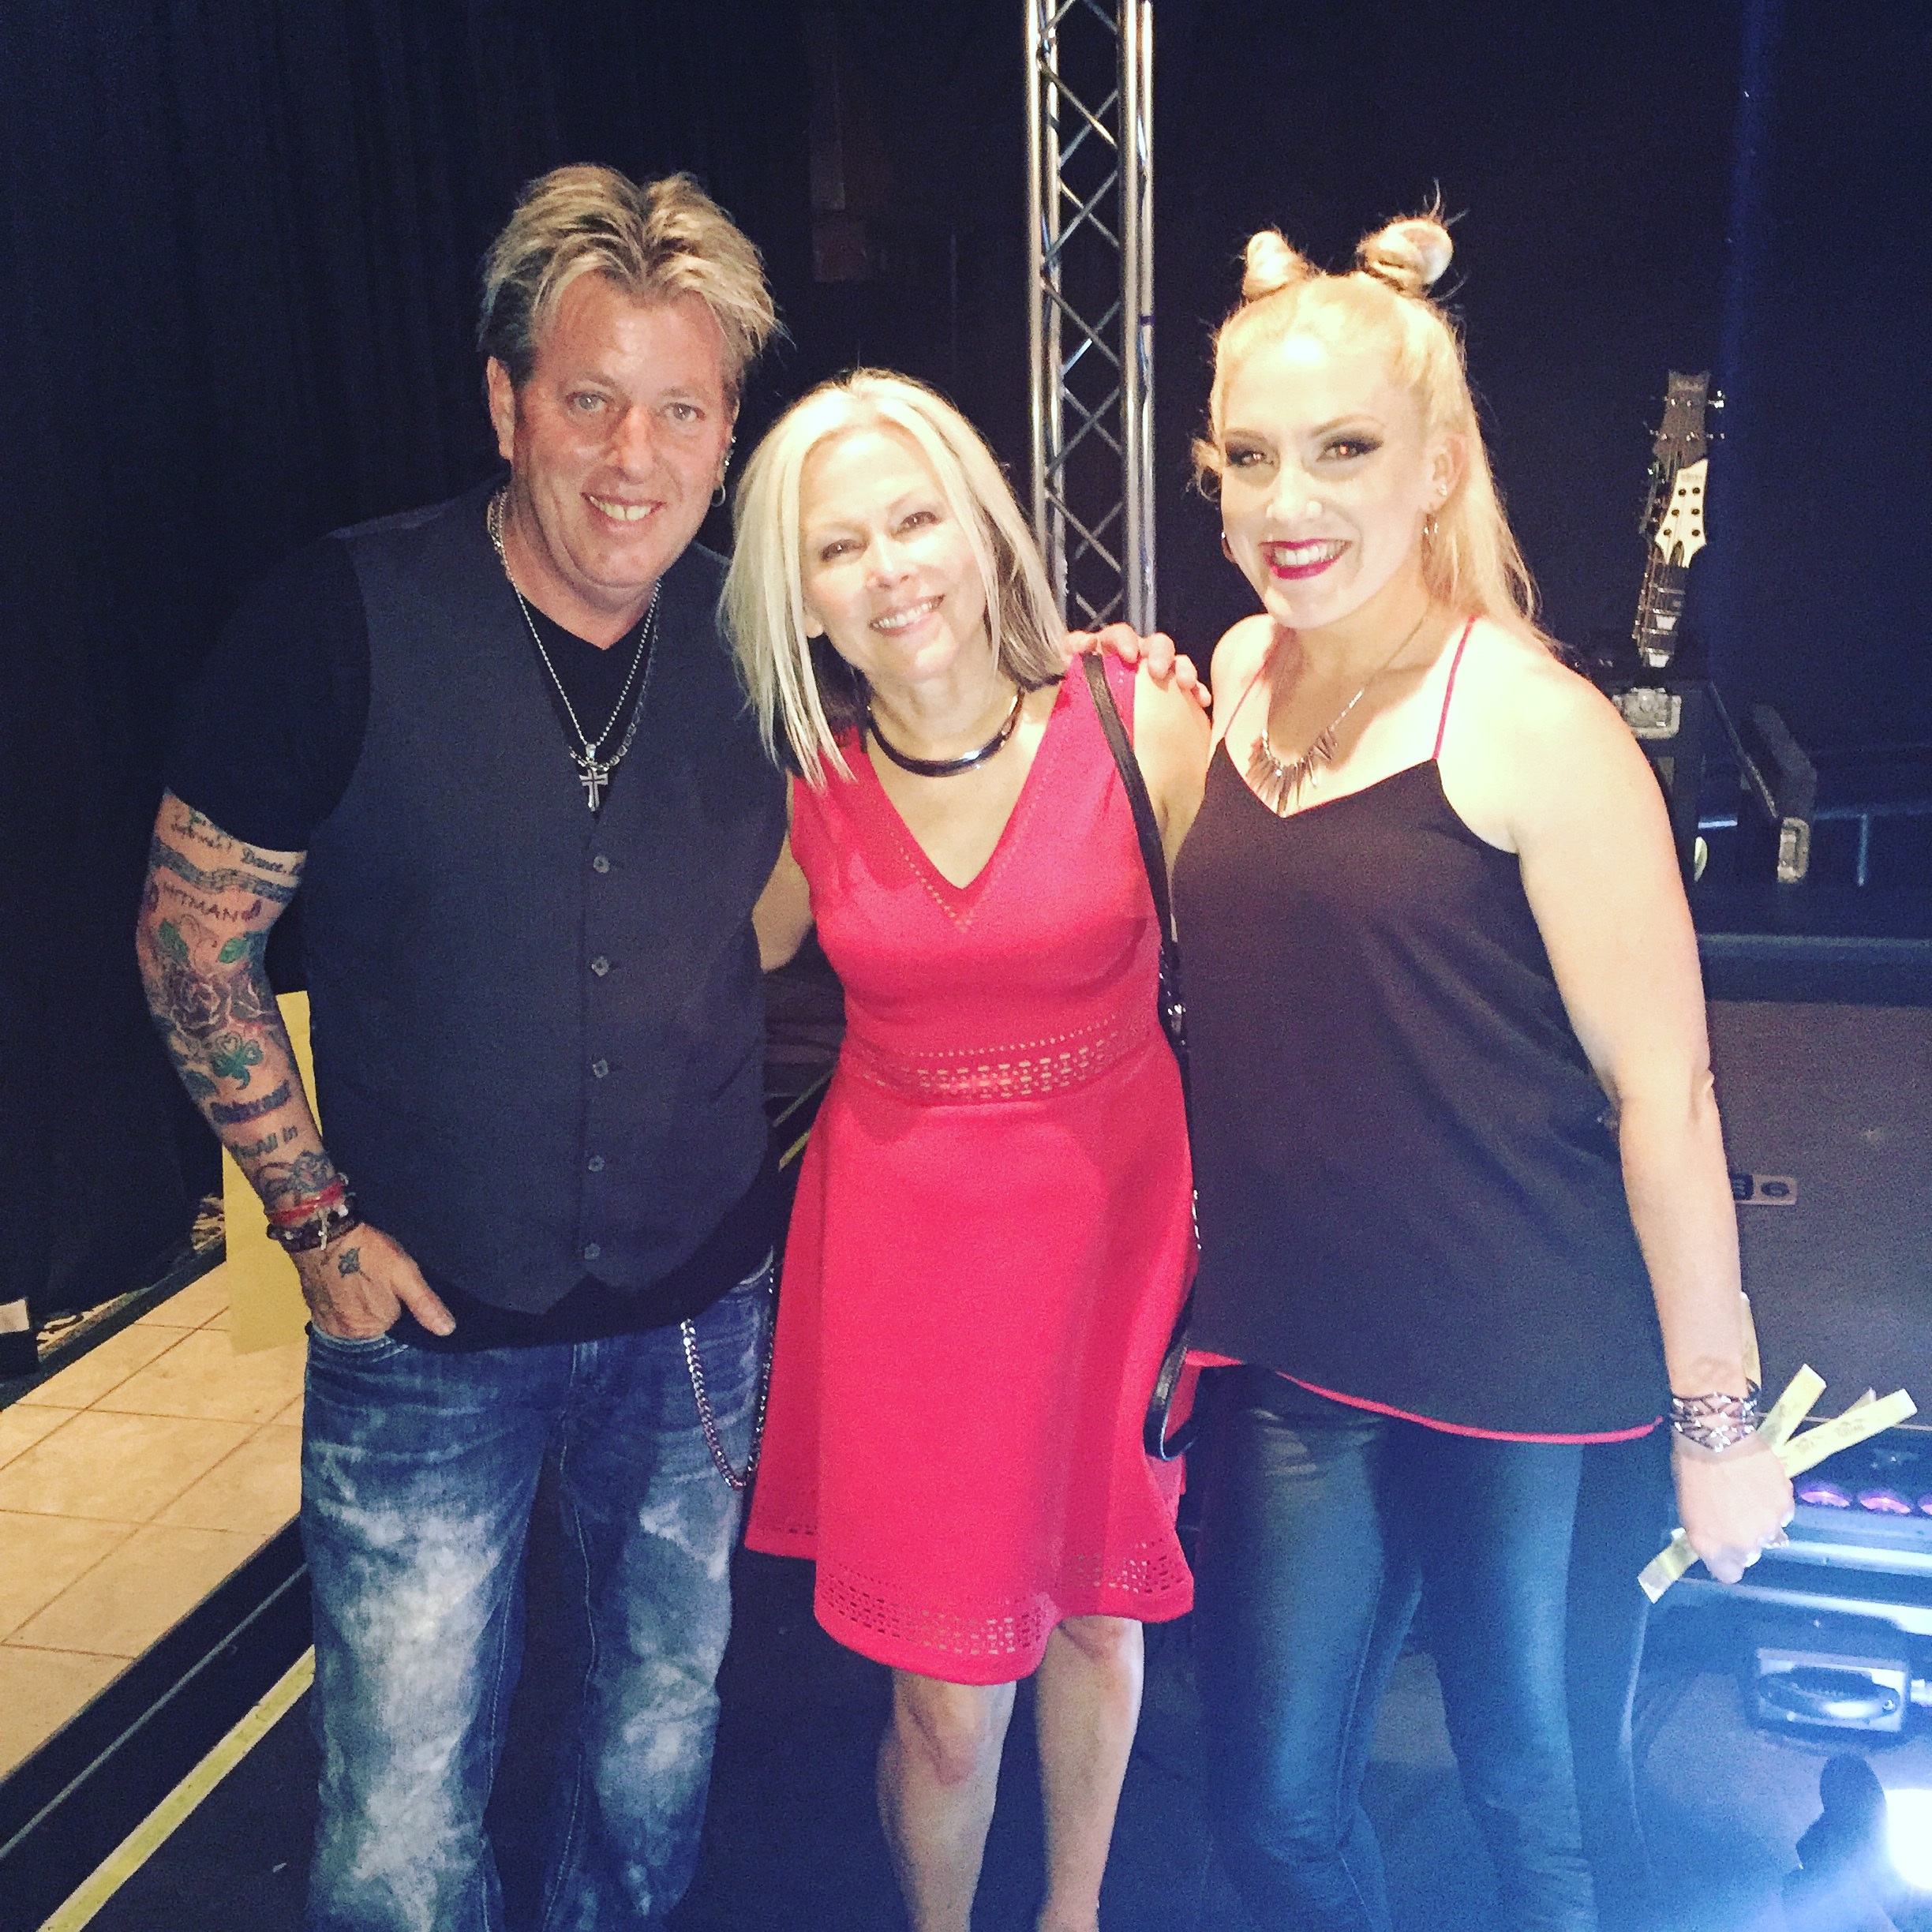 Joe and Angie Finley, The Swansons performed opening set for Terri Nunn of Berlin at The Rose Theatre in Pasadena CA